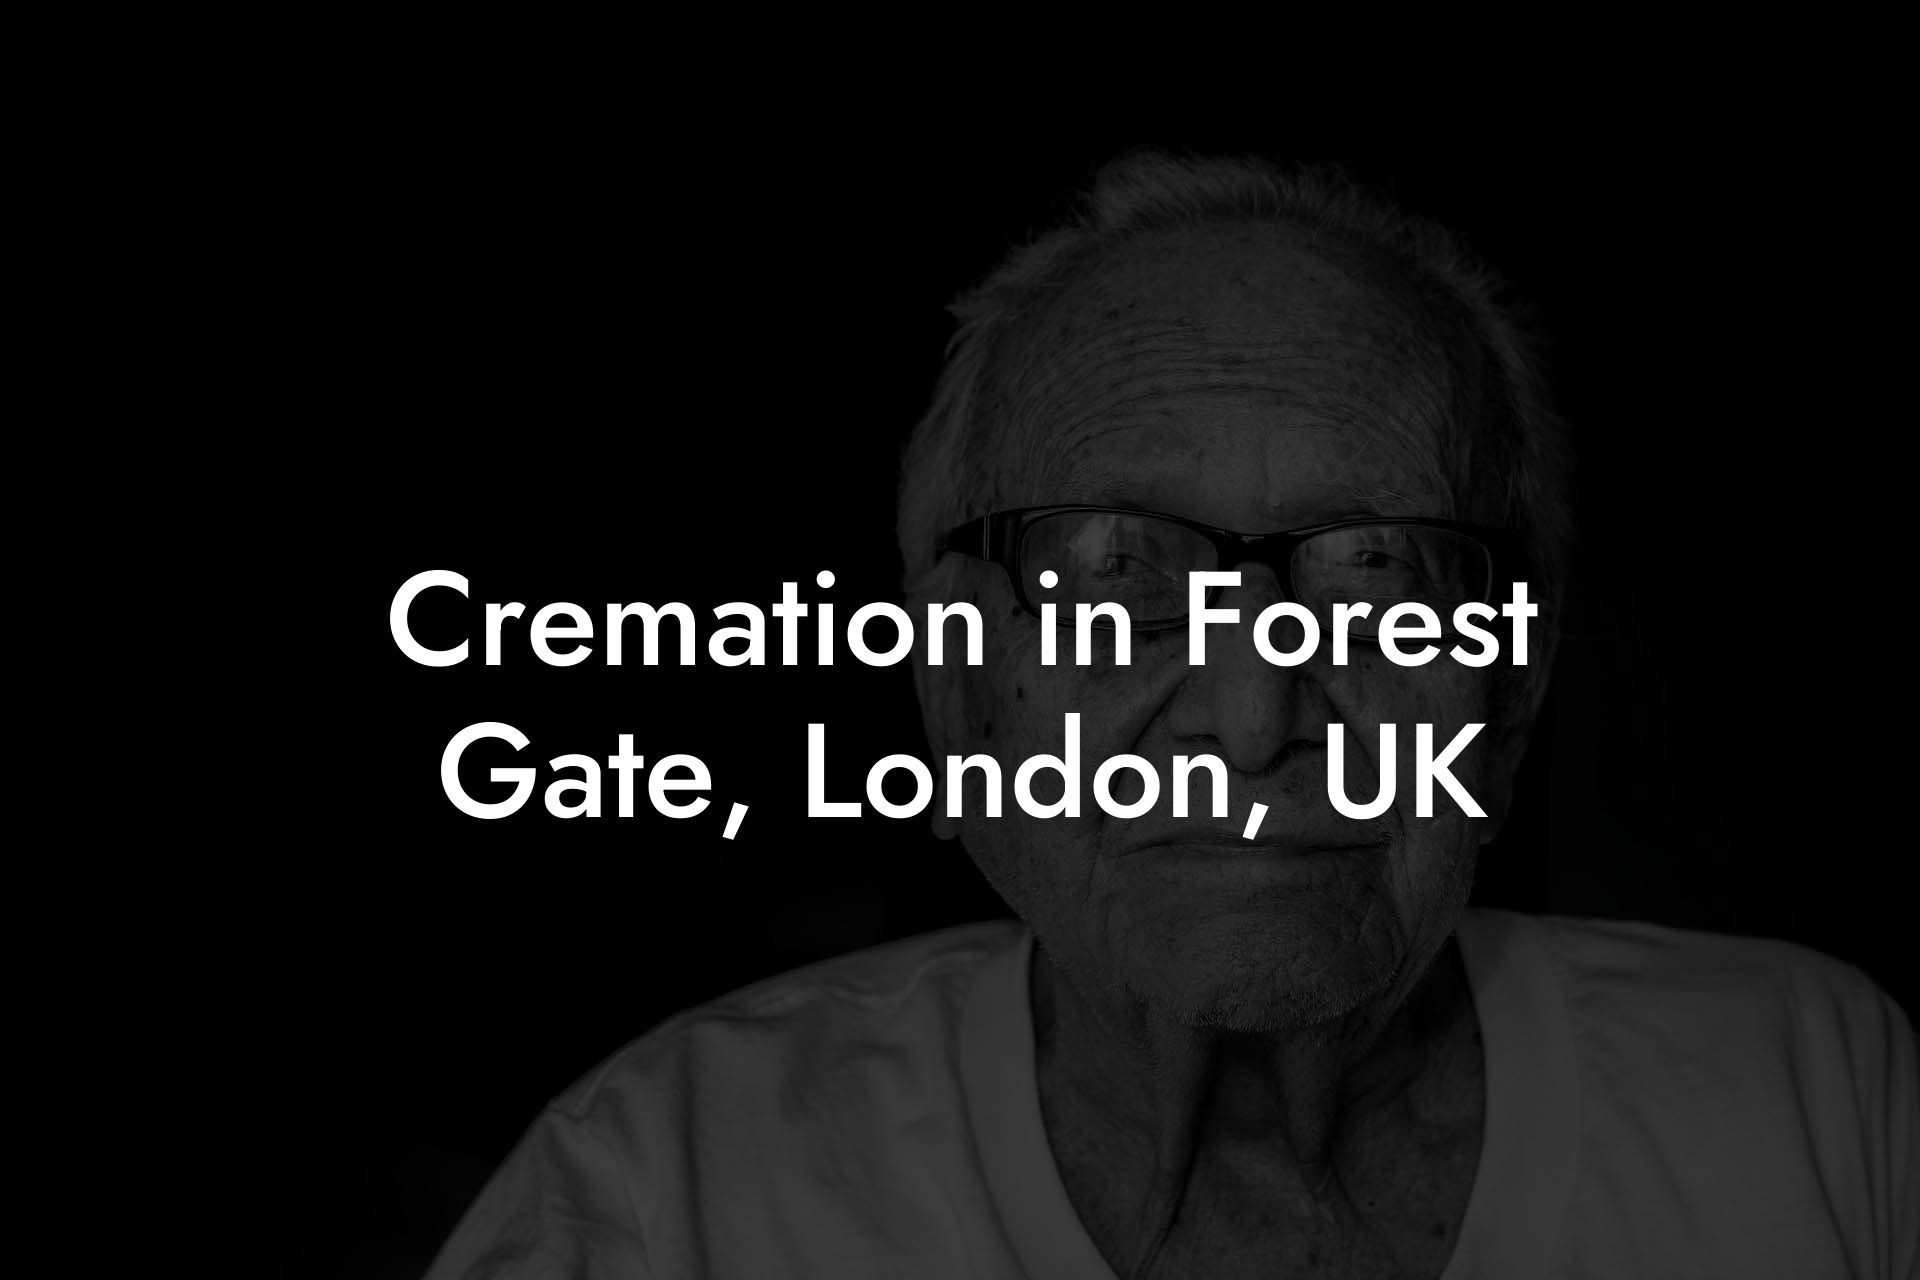 Cremation in Forest Gate, London, UK